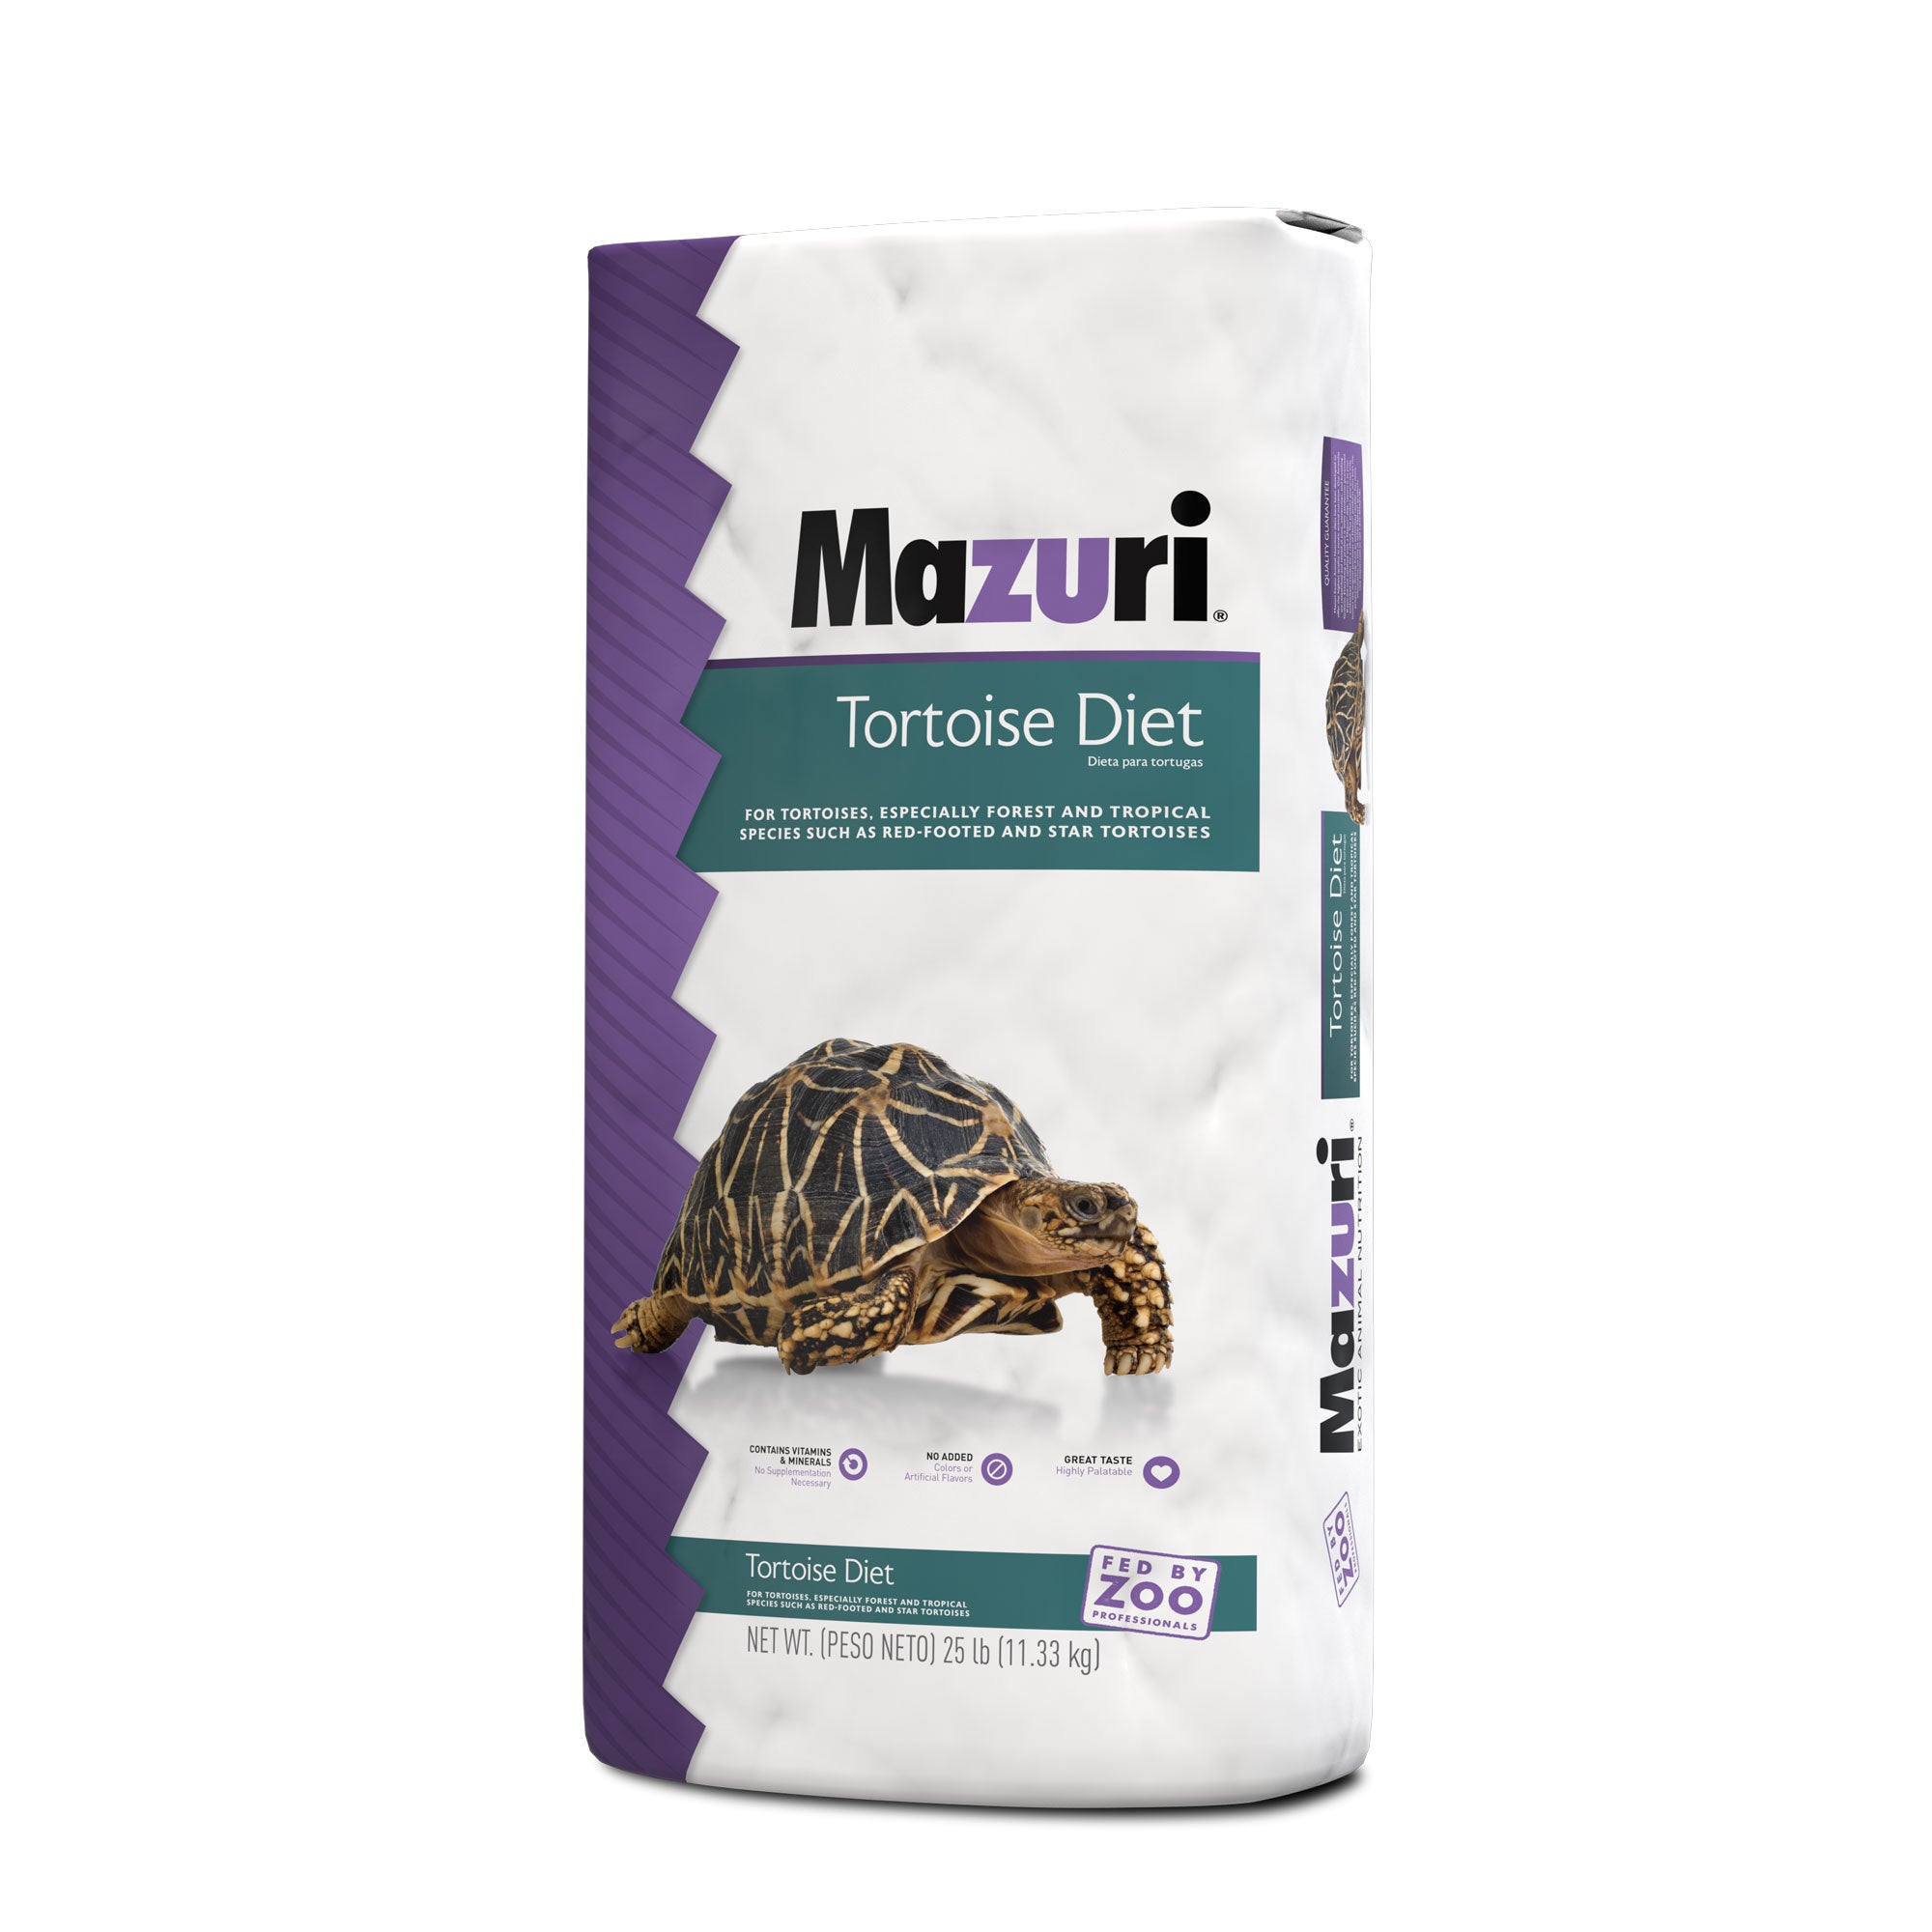 Mazuri Tortoise Diet large bag with tortoise image showing right gusset